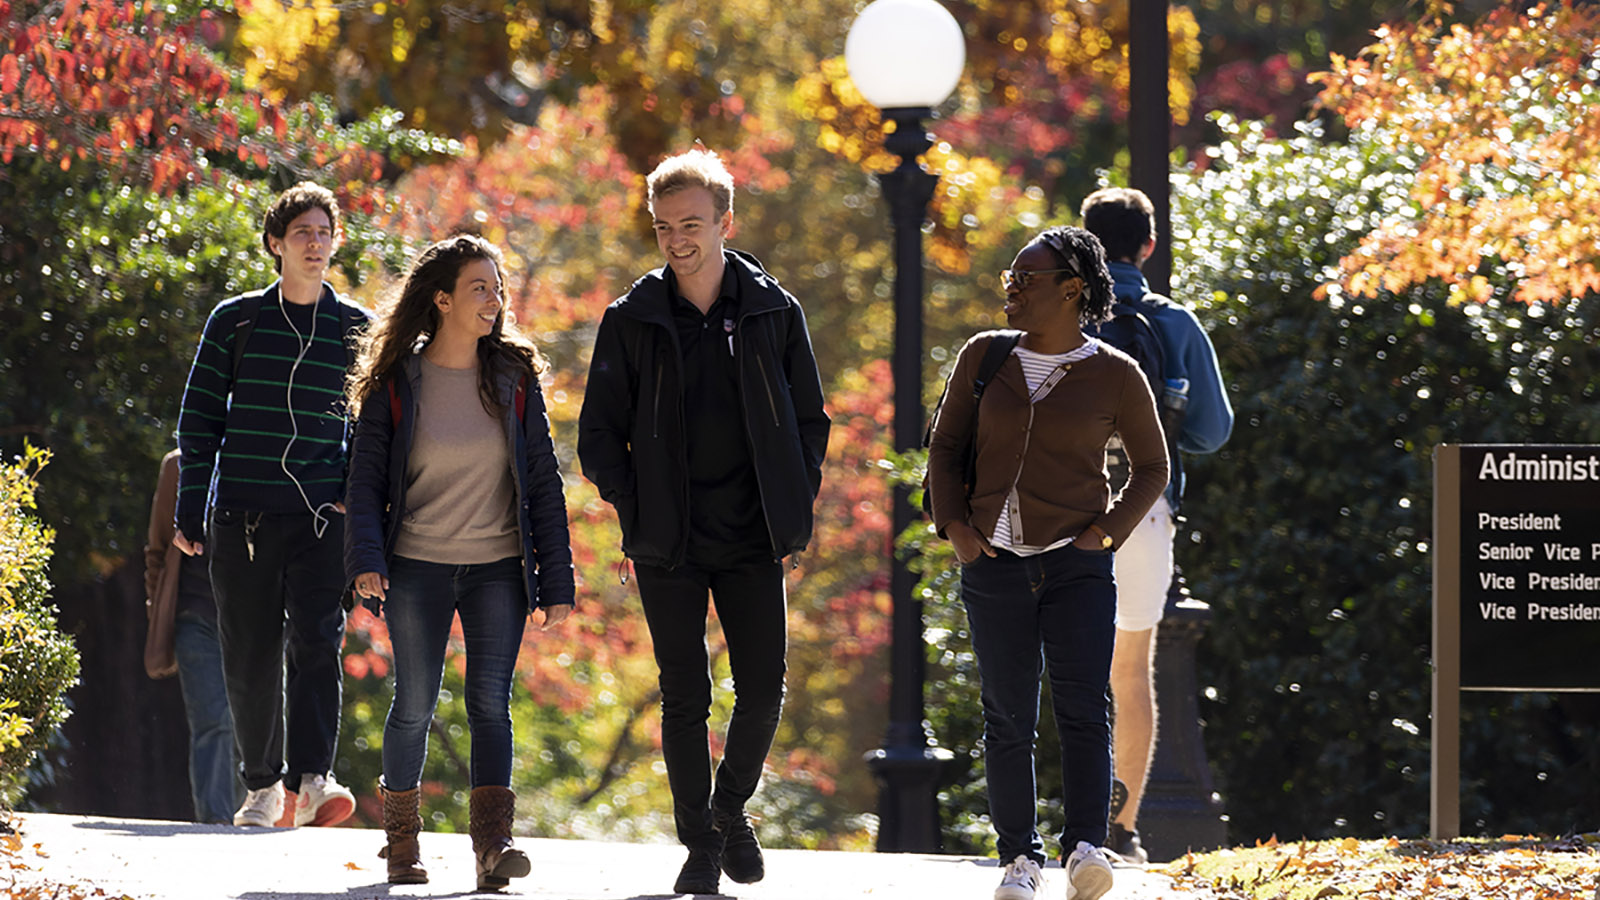 students-on-campus-in-fall-before-COVID-19